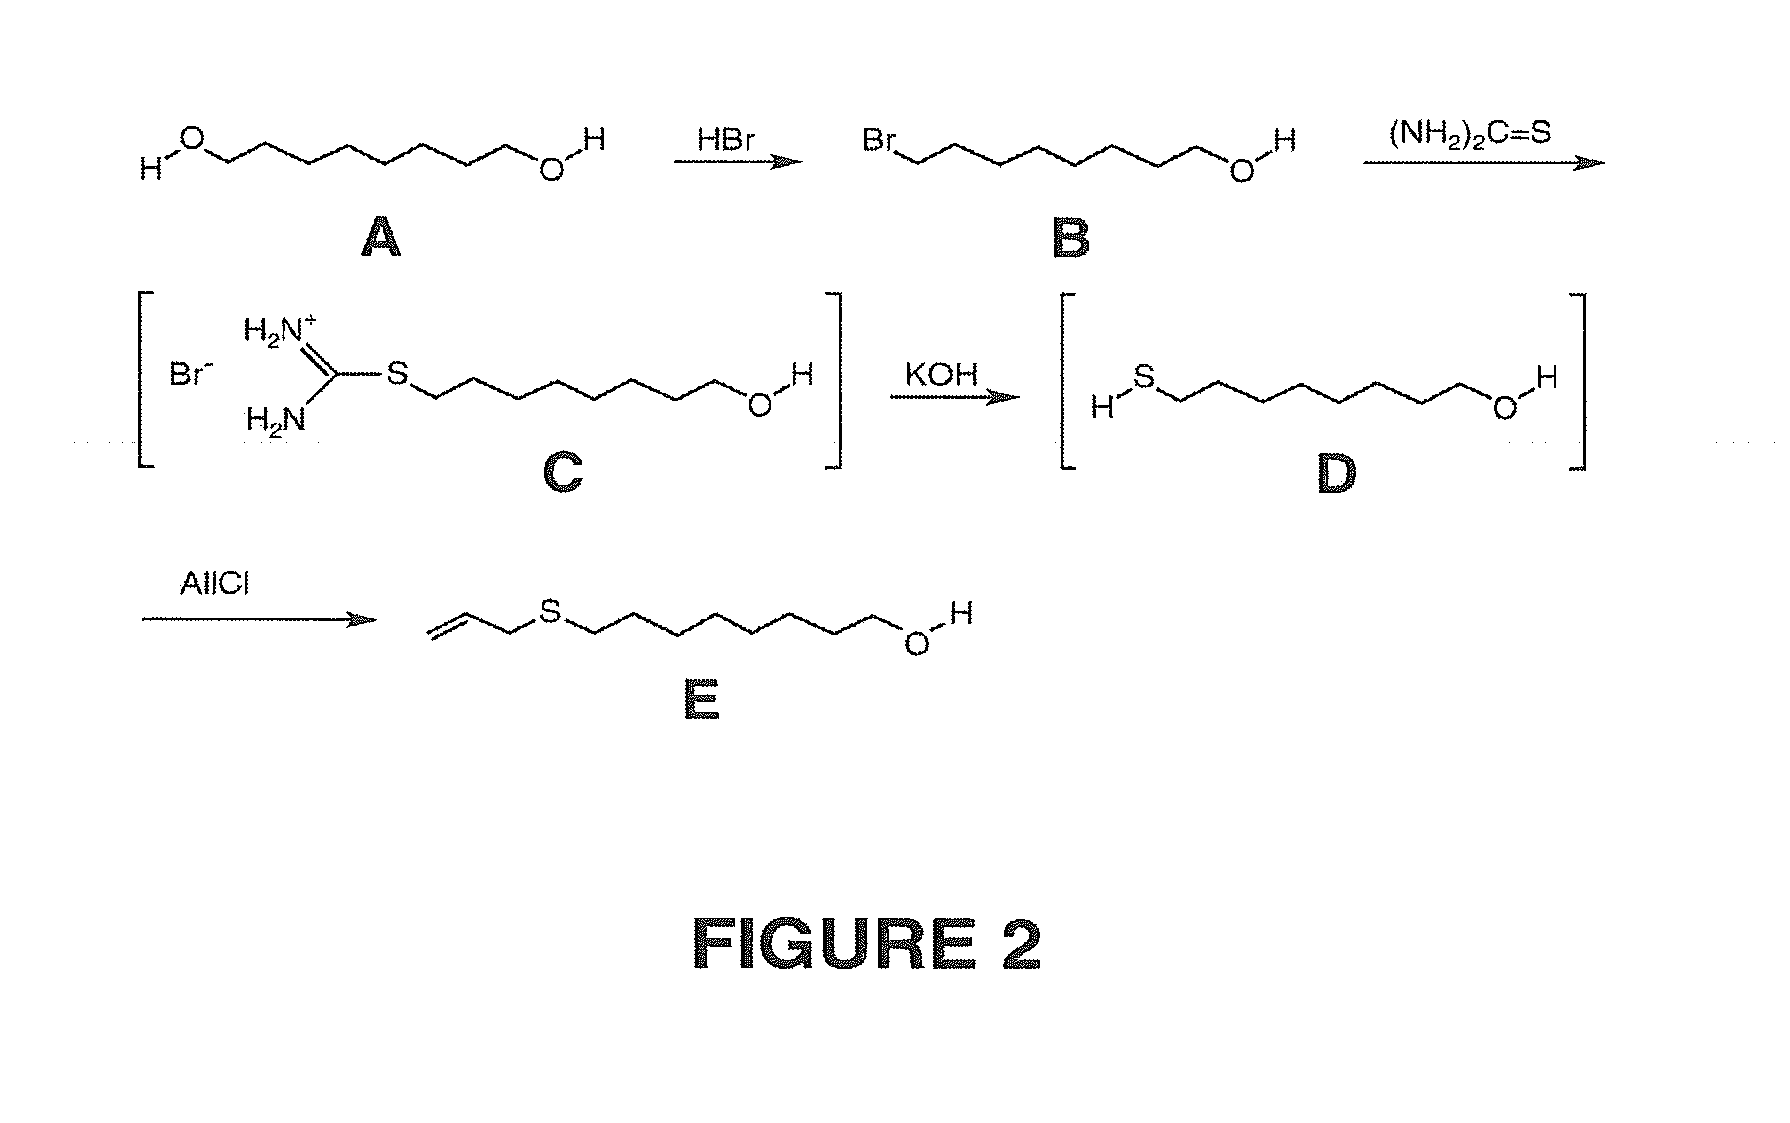 Compounds, compositions and methods for repelling blood-feeding arthropods and deterring their landing and feeding